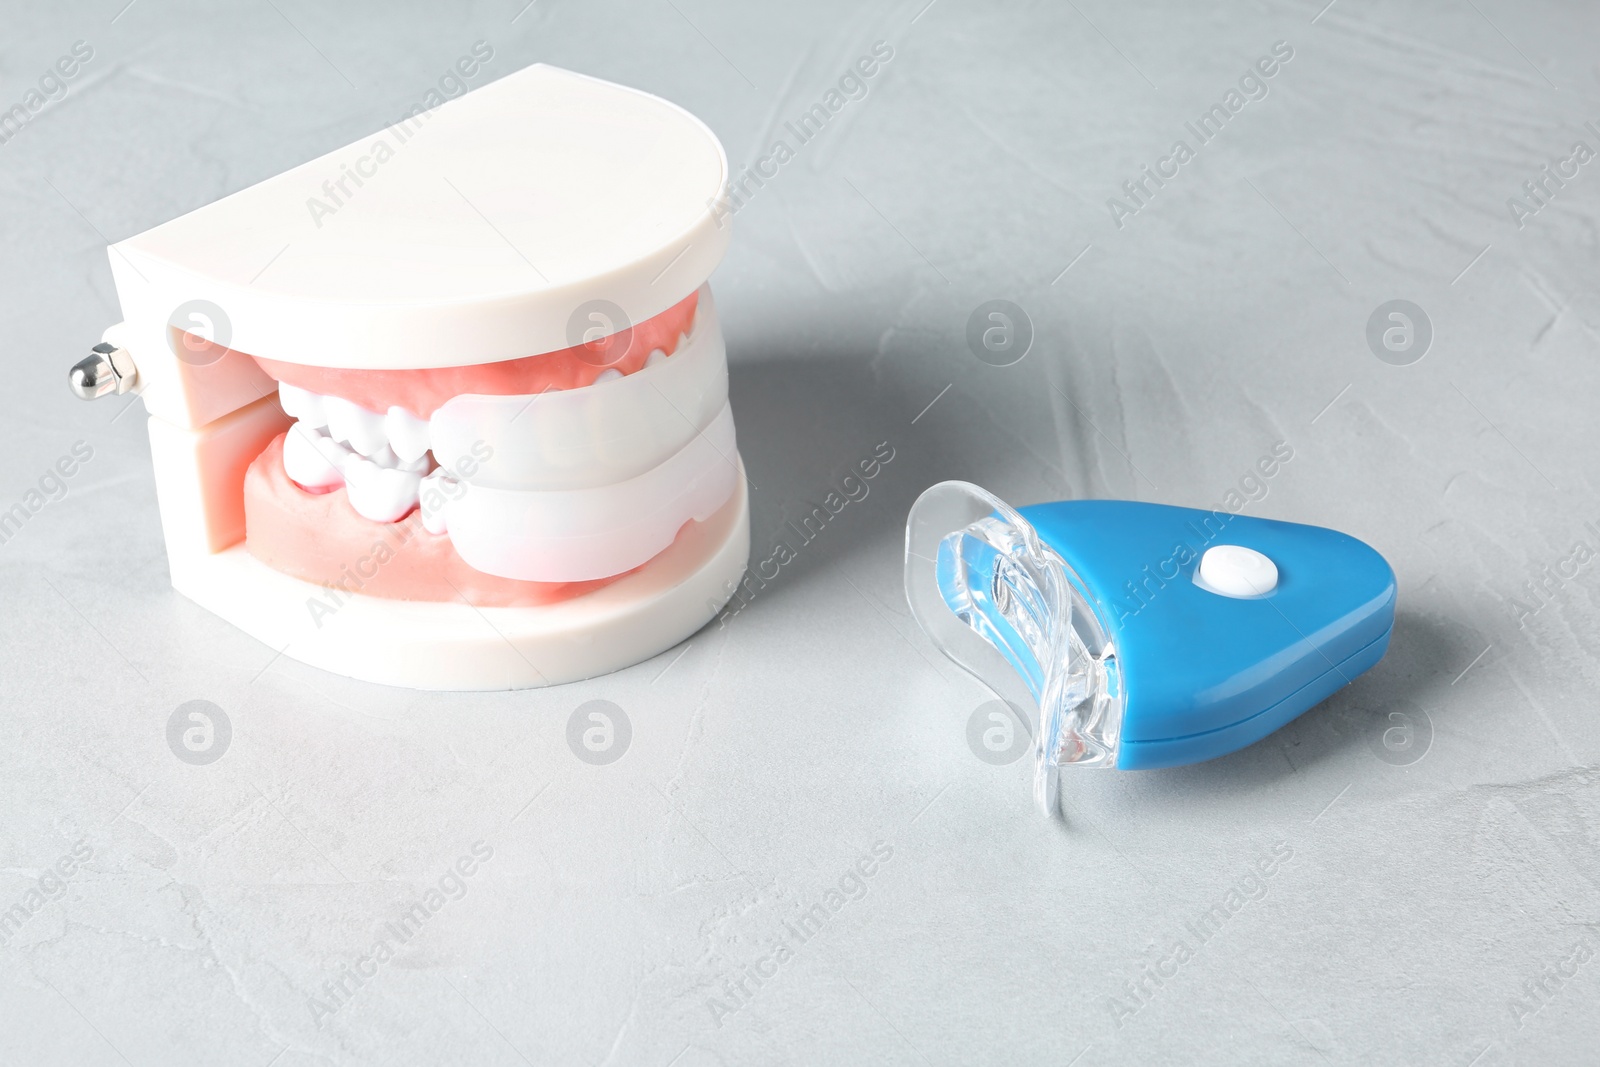 Photo of Educational model of oral cavity with teeth and whitening device on table